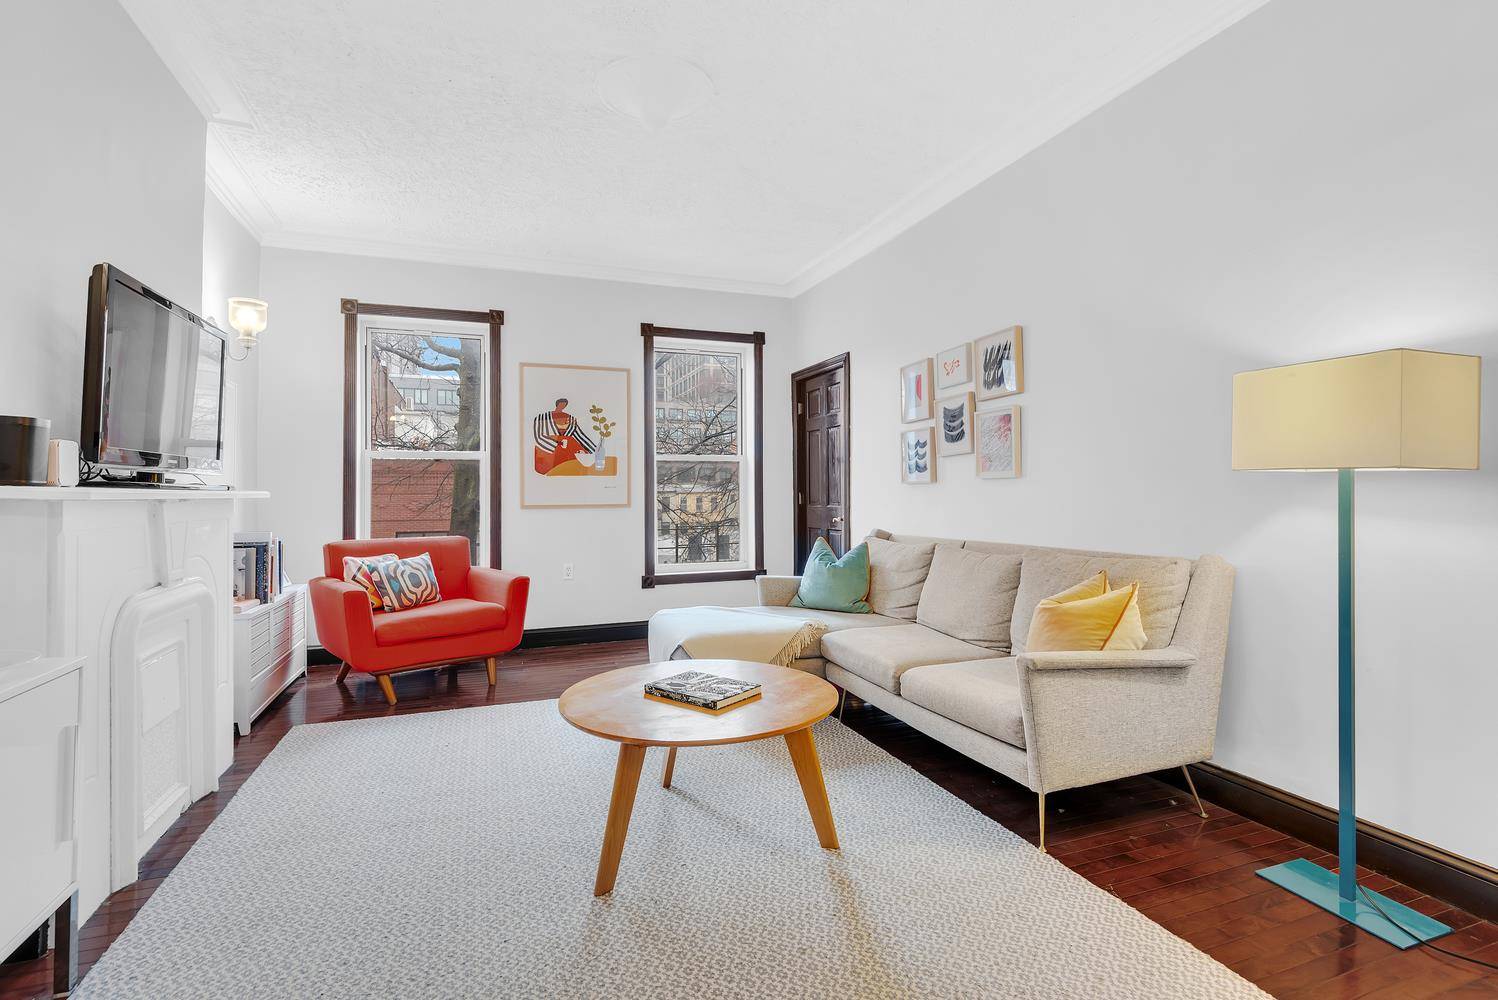 This delightful 1. 5 bedroom apartment in the heart of Prospect Heights offers a perfect blend of modern convenience and classic style.